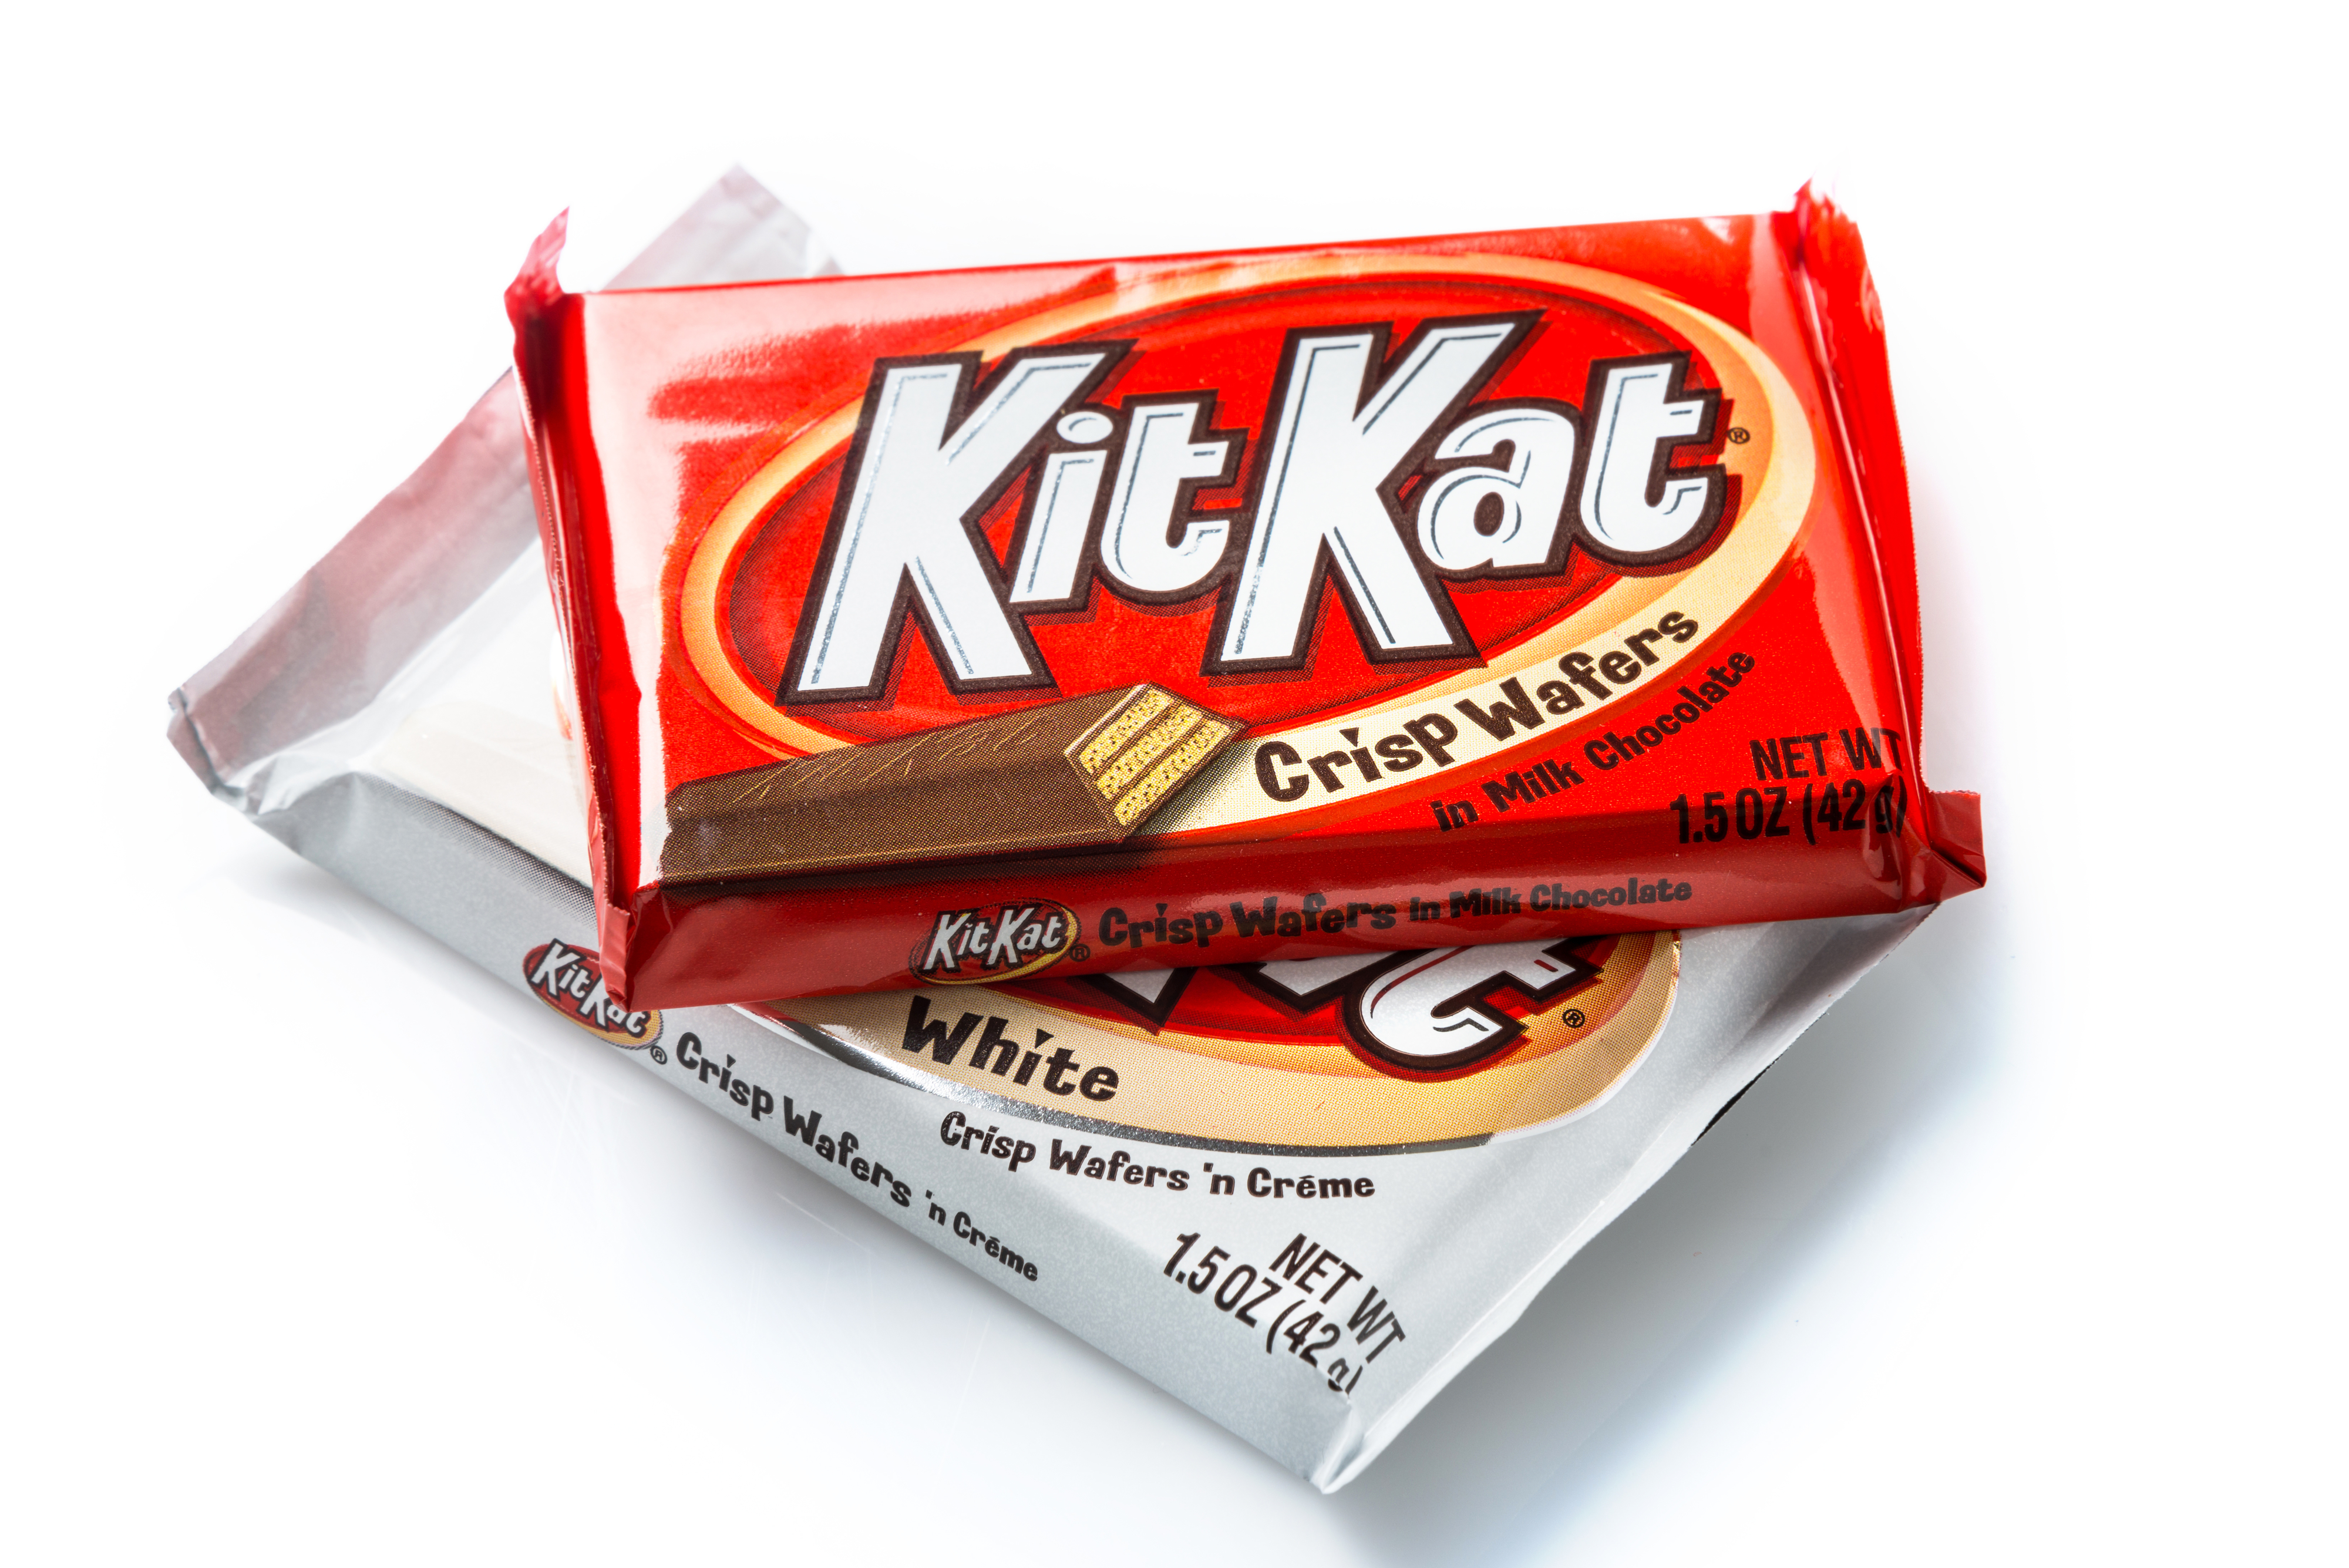 Two Kit Kats in wrappers, one red and one white